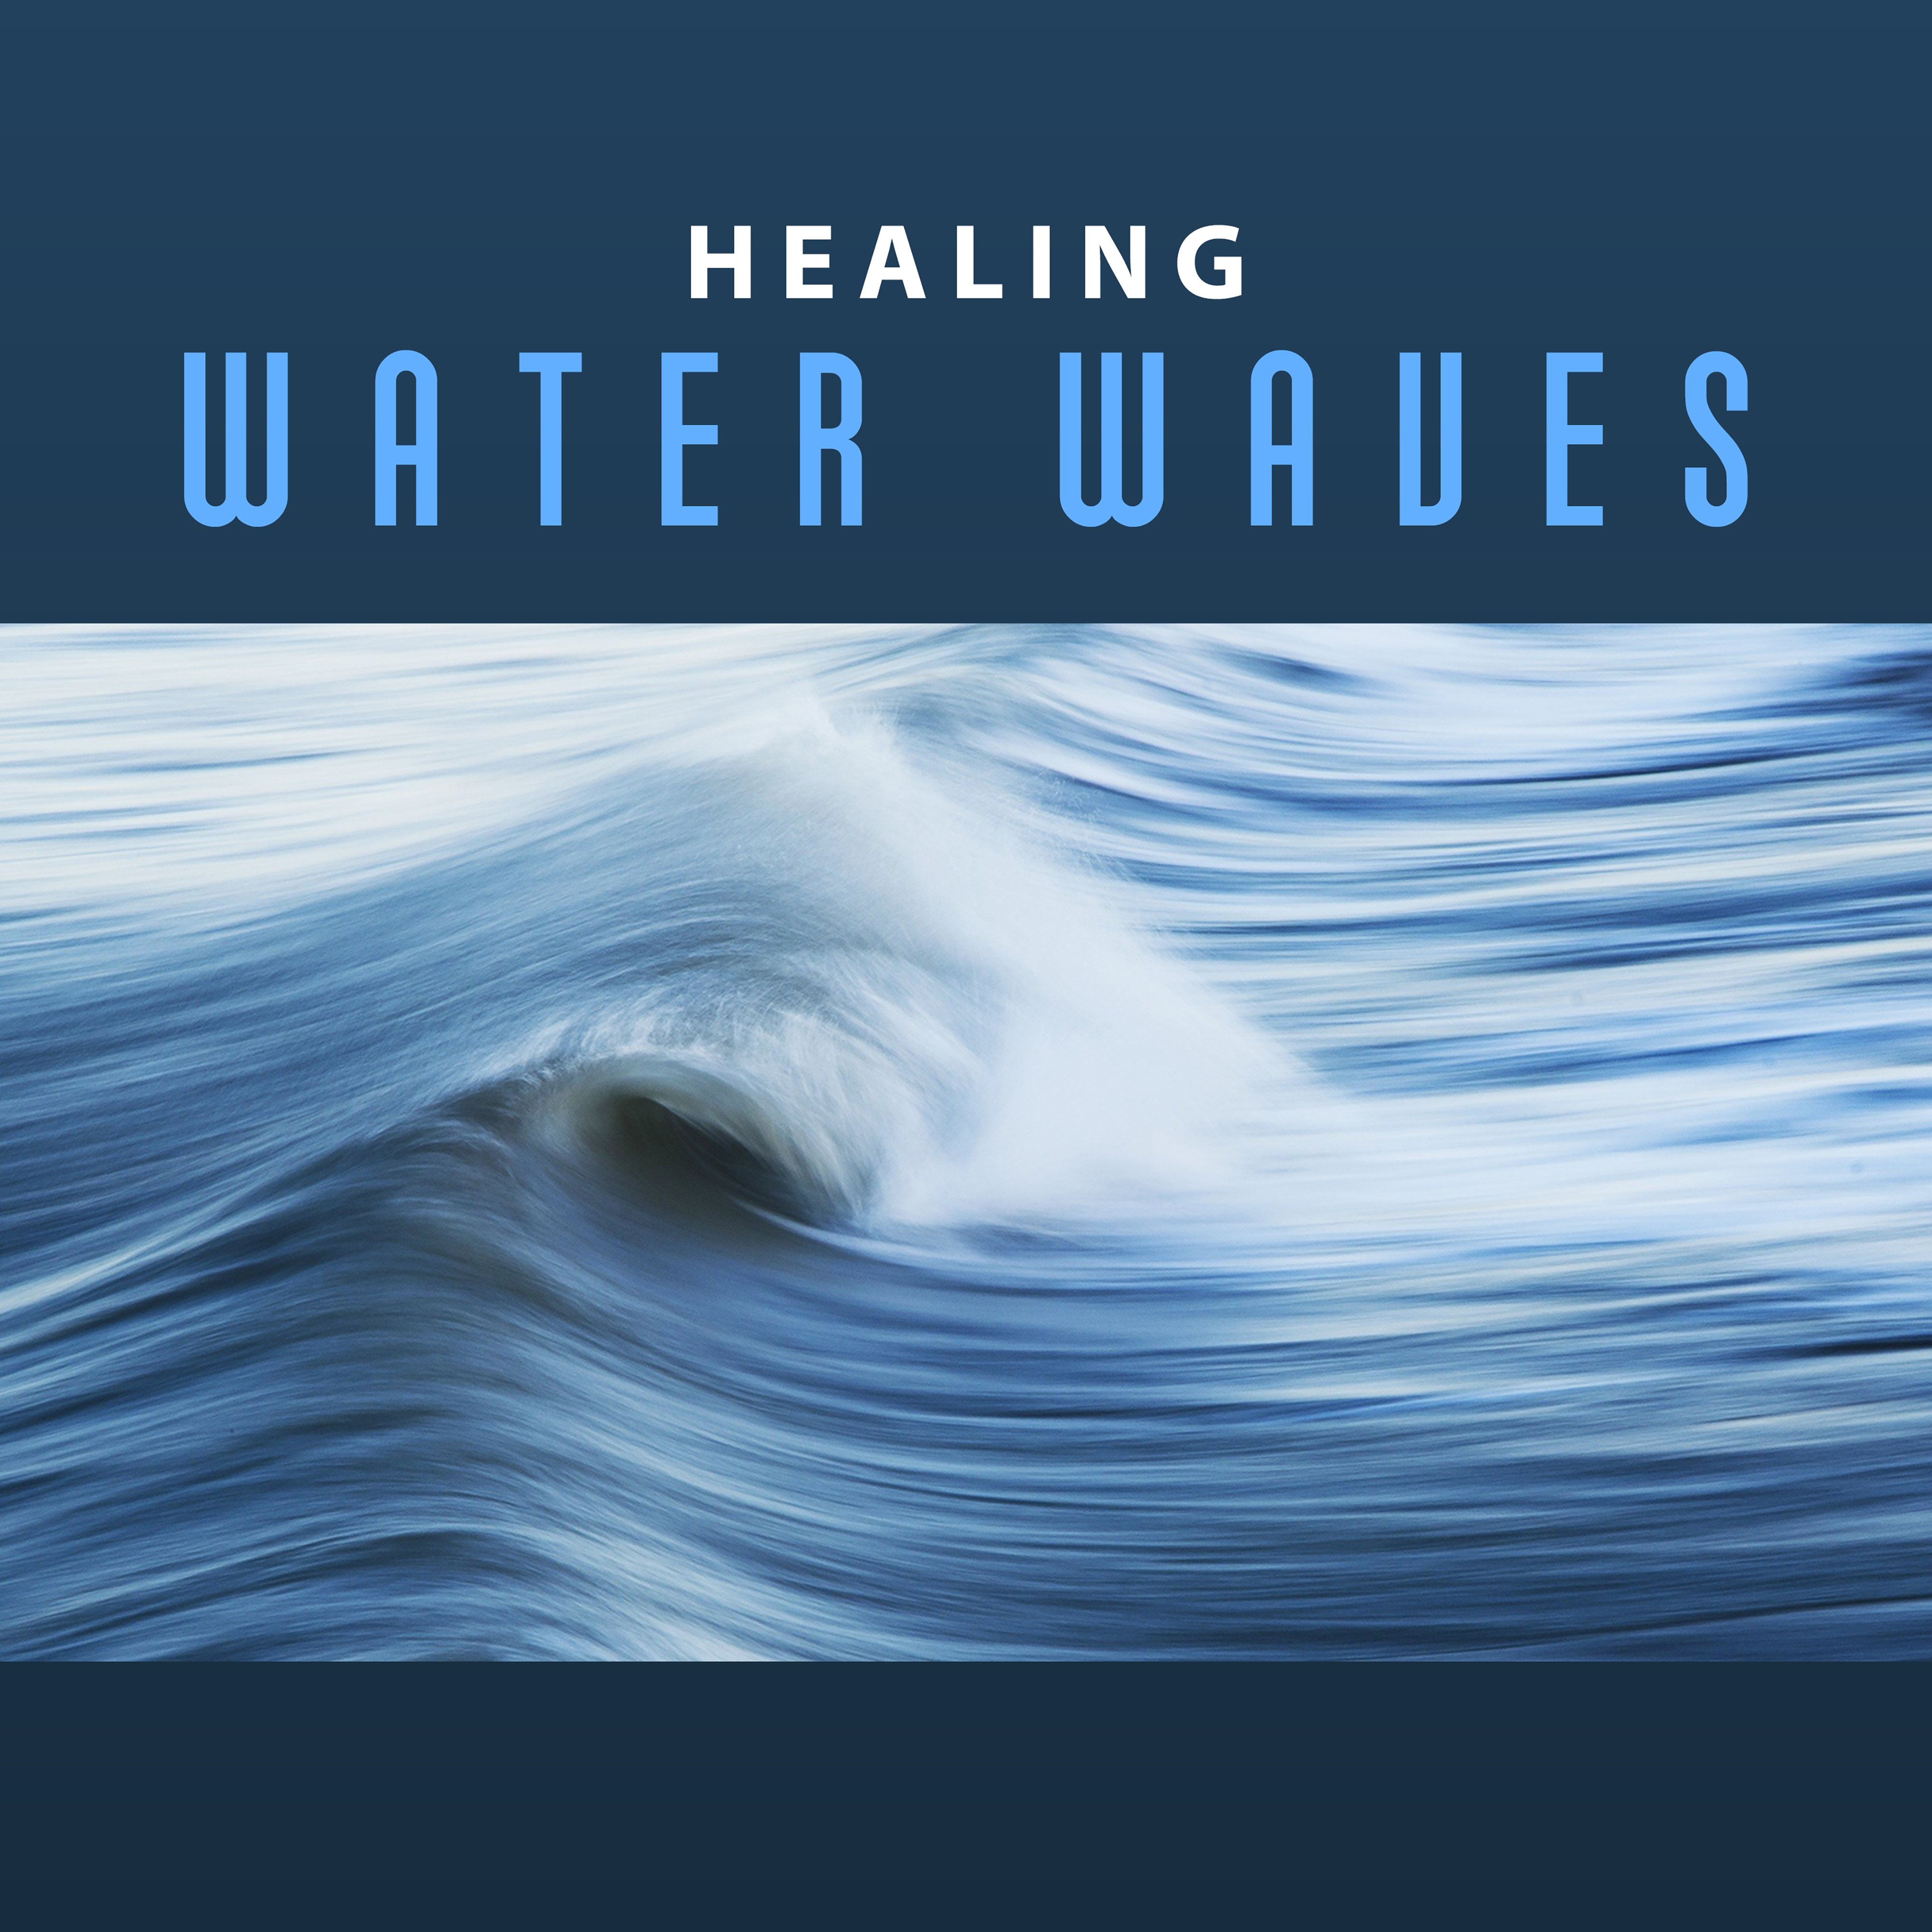 Healing Water Waves – Calming Sounds to Relax, Chilled Music, Rest a Bit, New Age Nature Sounds